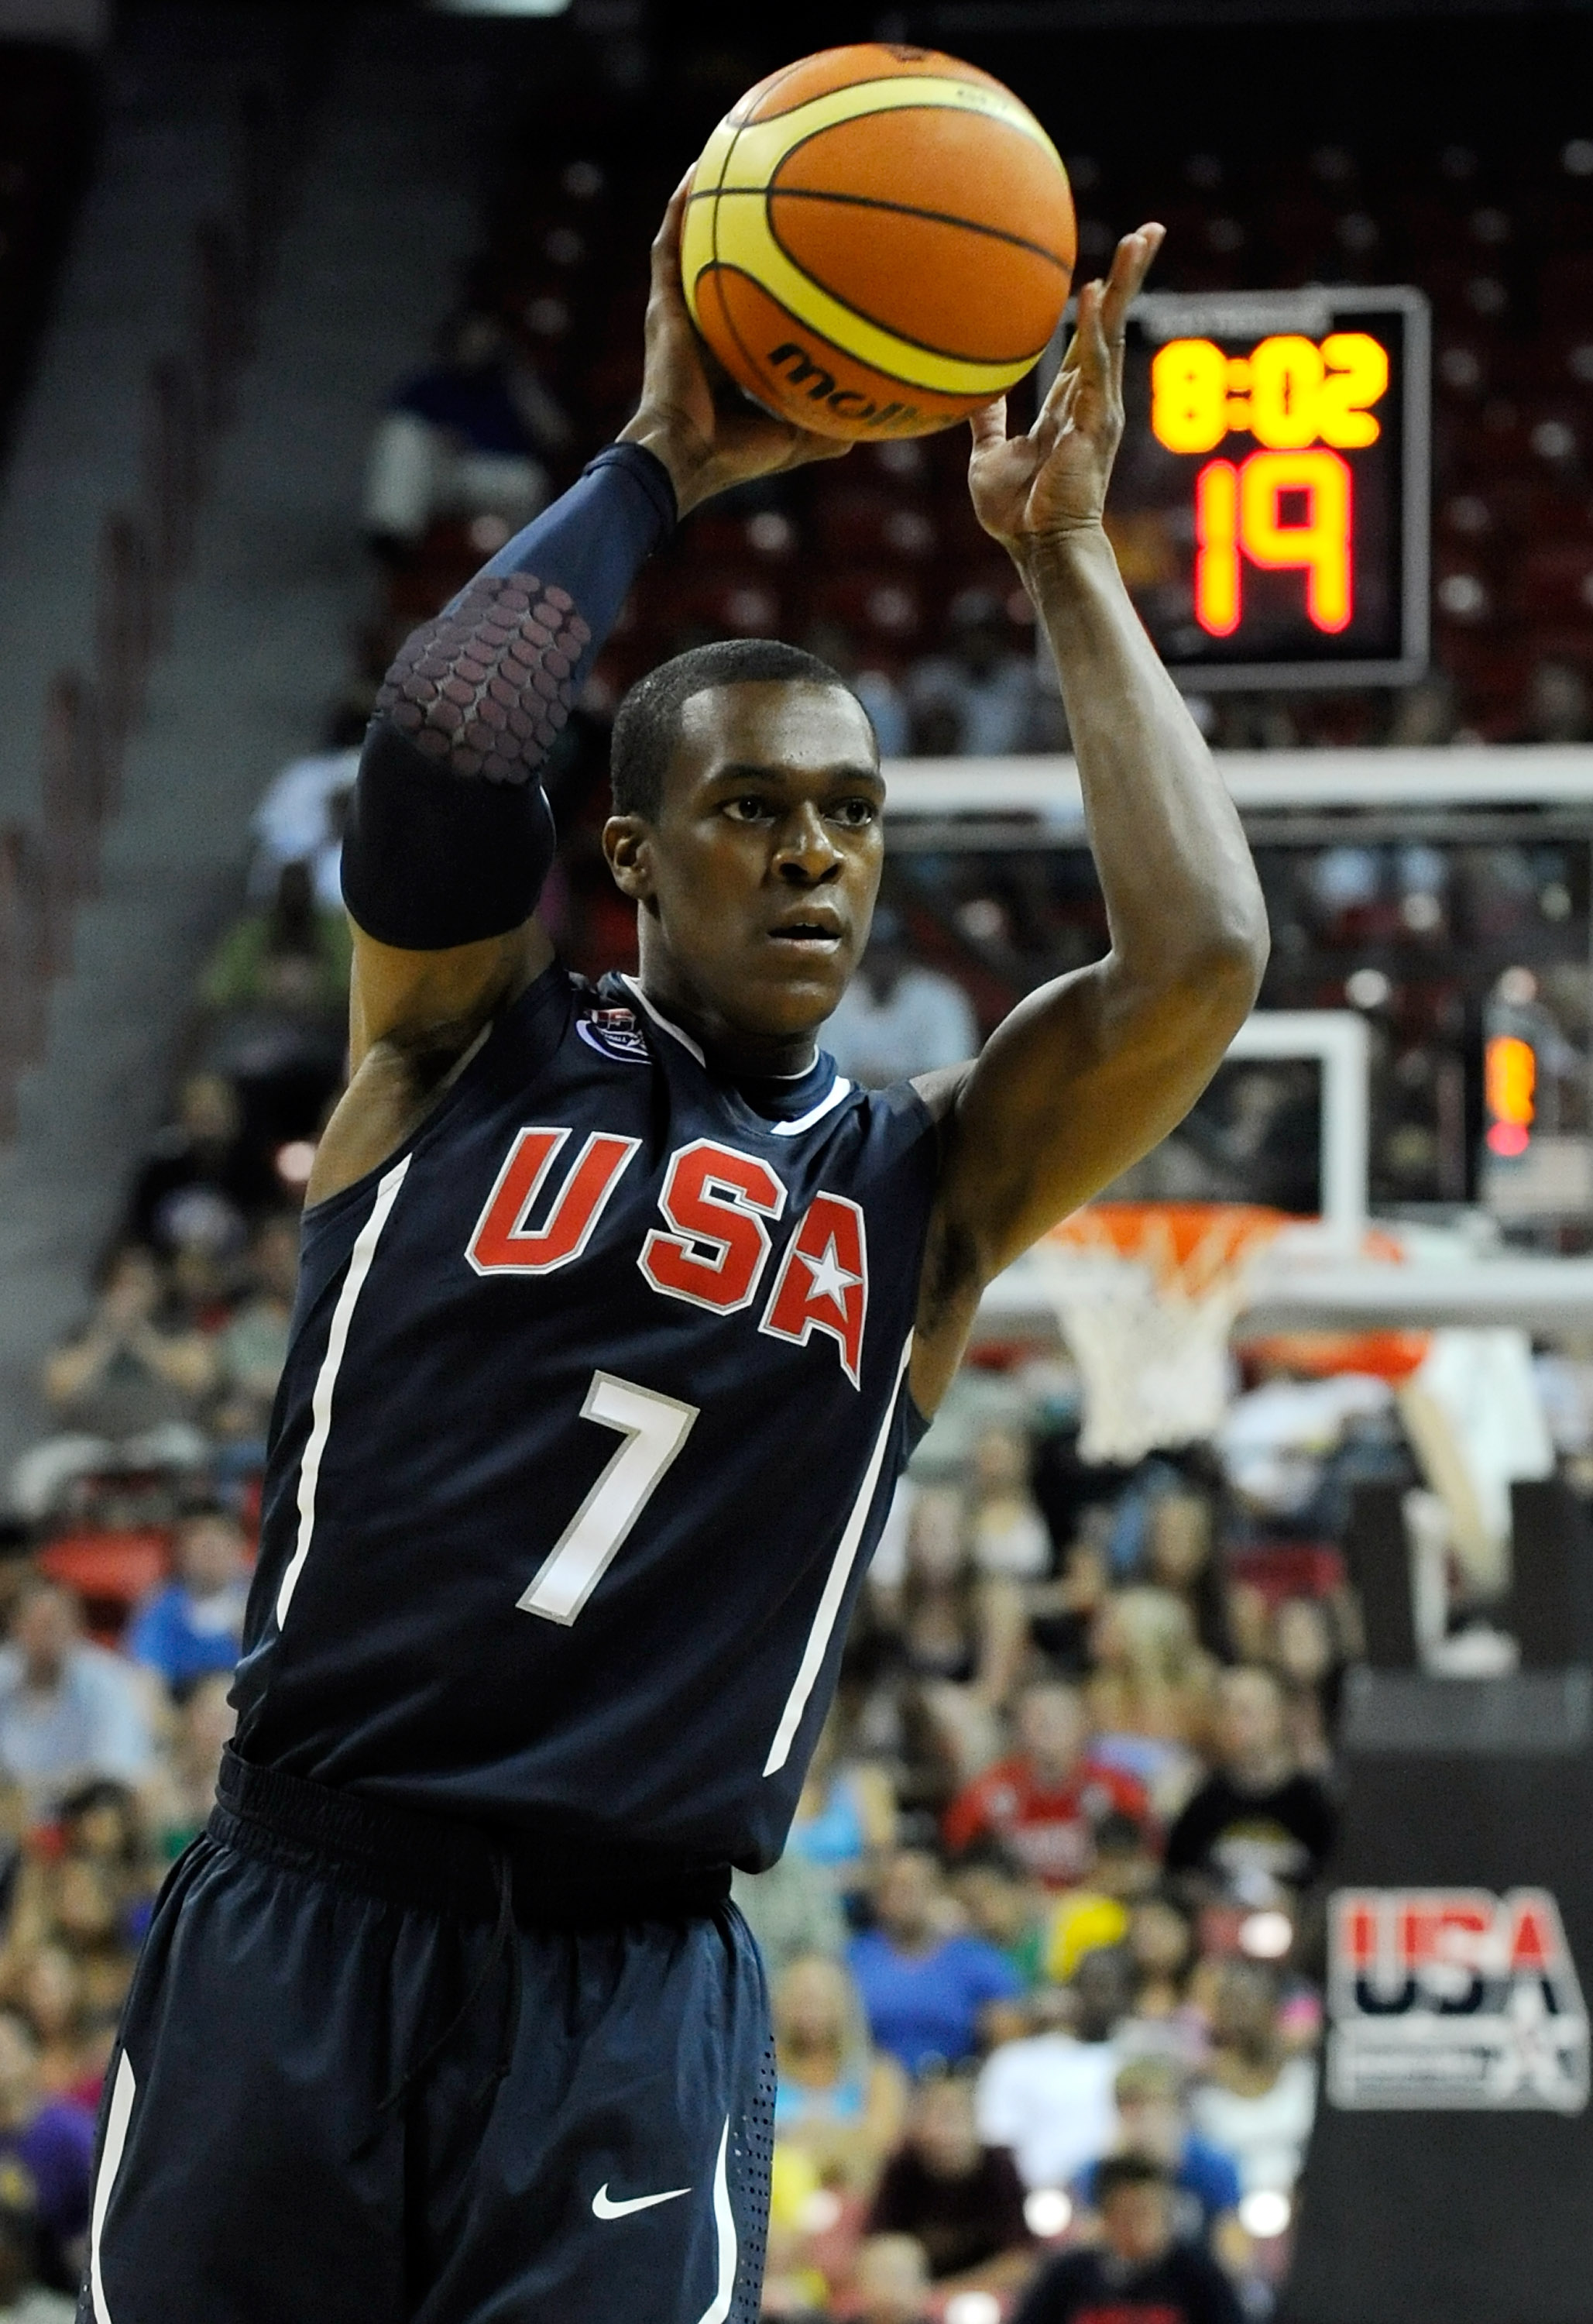 LAS VEGAS - JULY 24:  Rajon Rondo #7 of the 2010 USA Basketball Men's National Team looks to pass during a USA Basketball showcase at the Thomas & Mack Center July 24, 2010 in Las Vegas, Nevada.  (Photo by Ethan Miller/Getty Images)